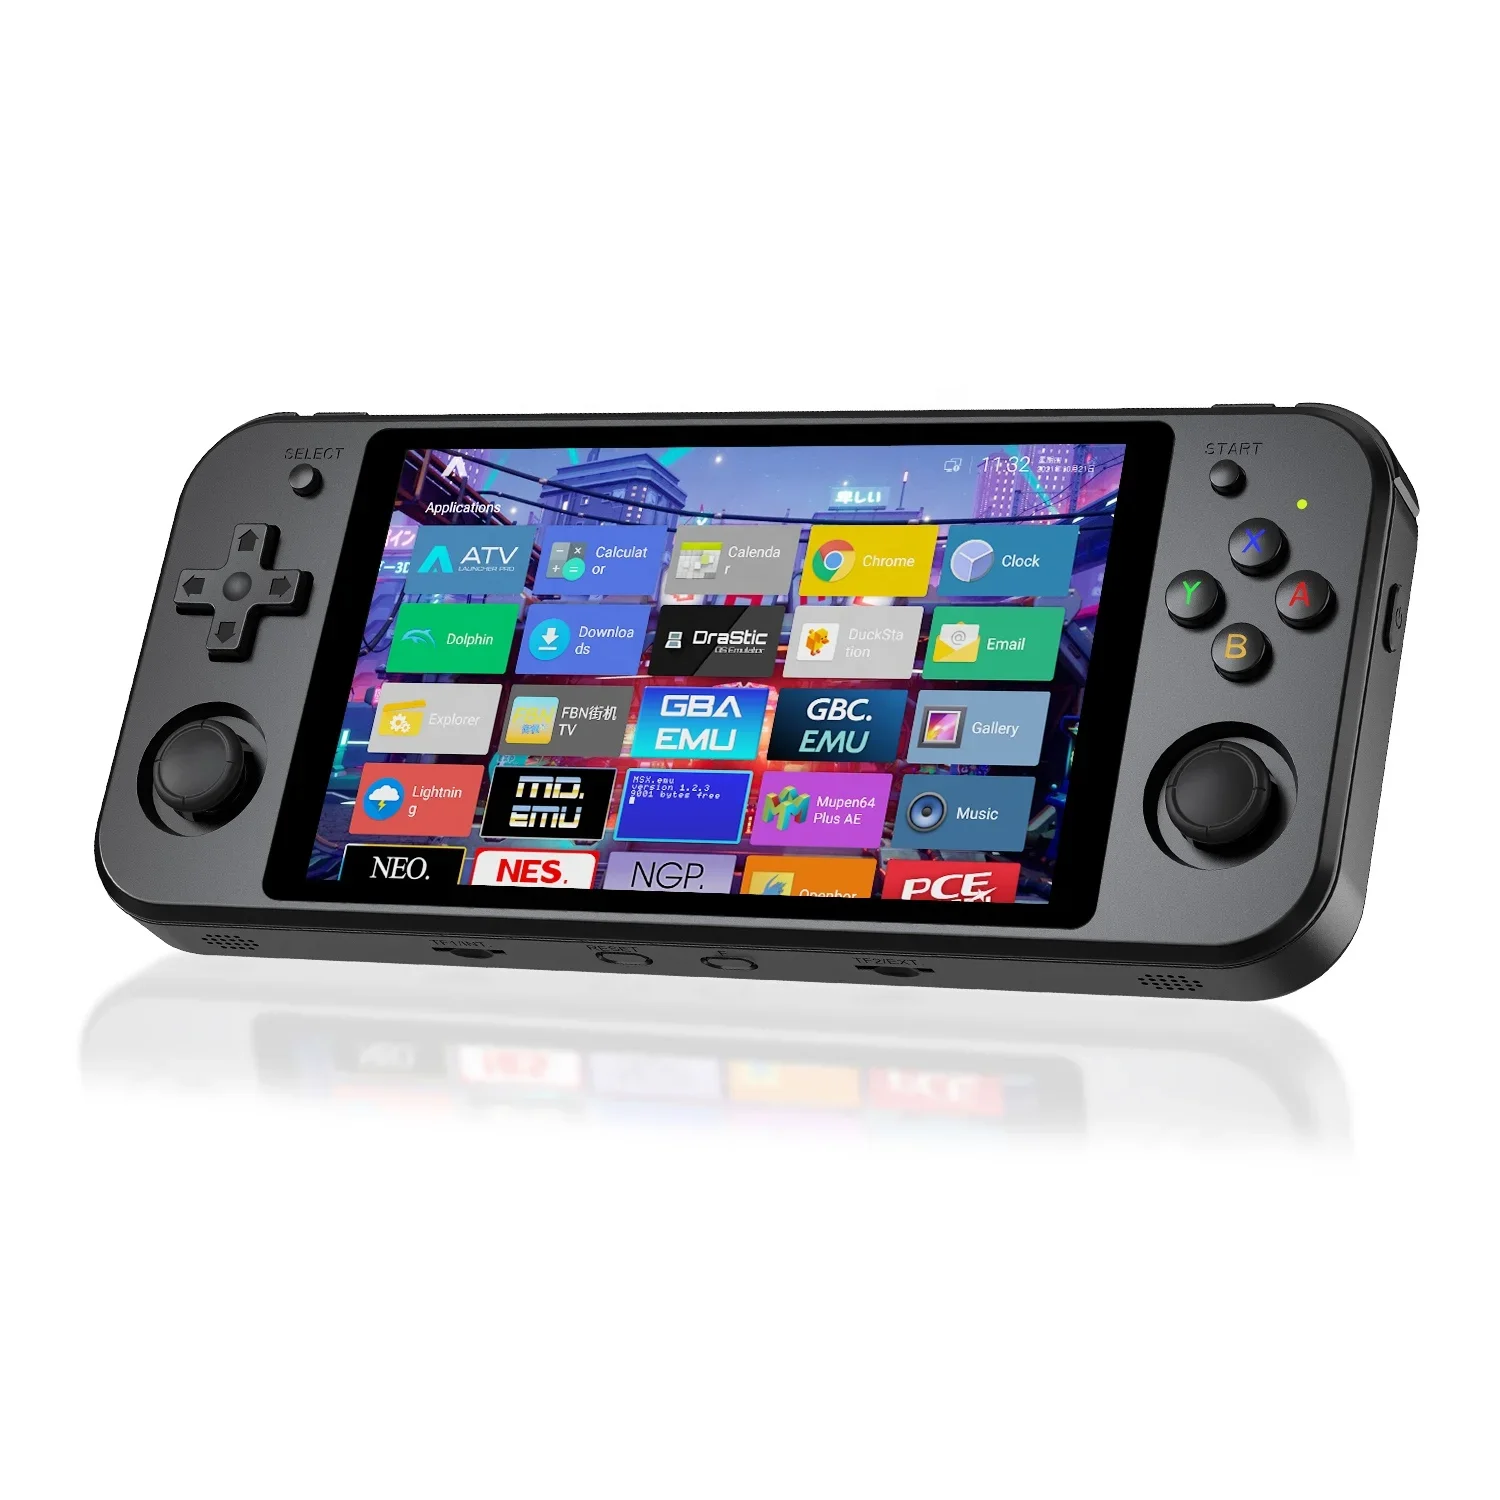 Retro Handheld Game Player RK3399 Linux Android Du...